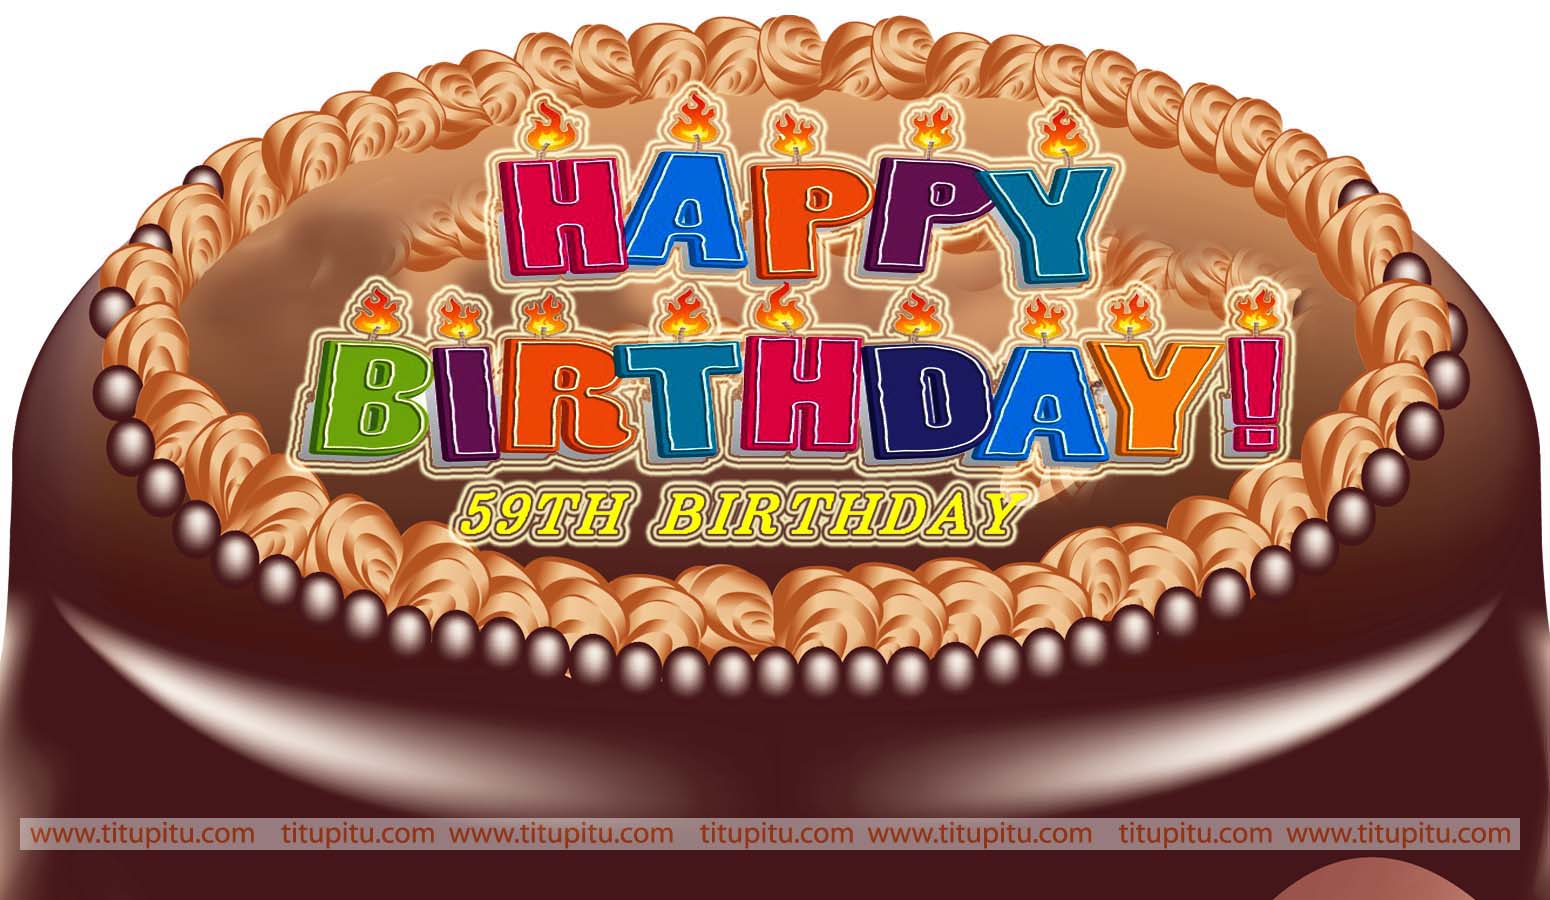 59th Birthday Wishes Message - Download 43rd Birthday Cake - HD Wallpaper 